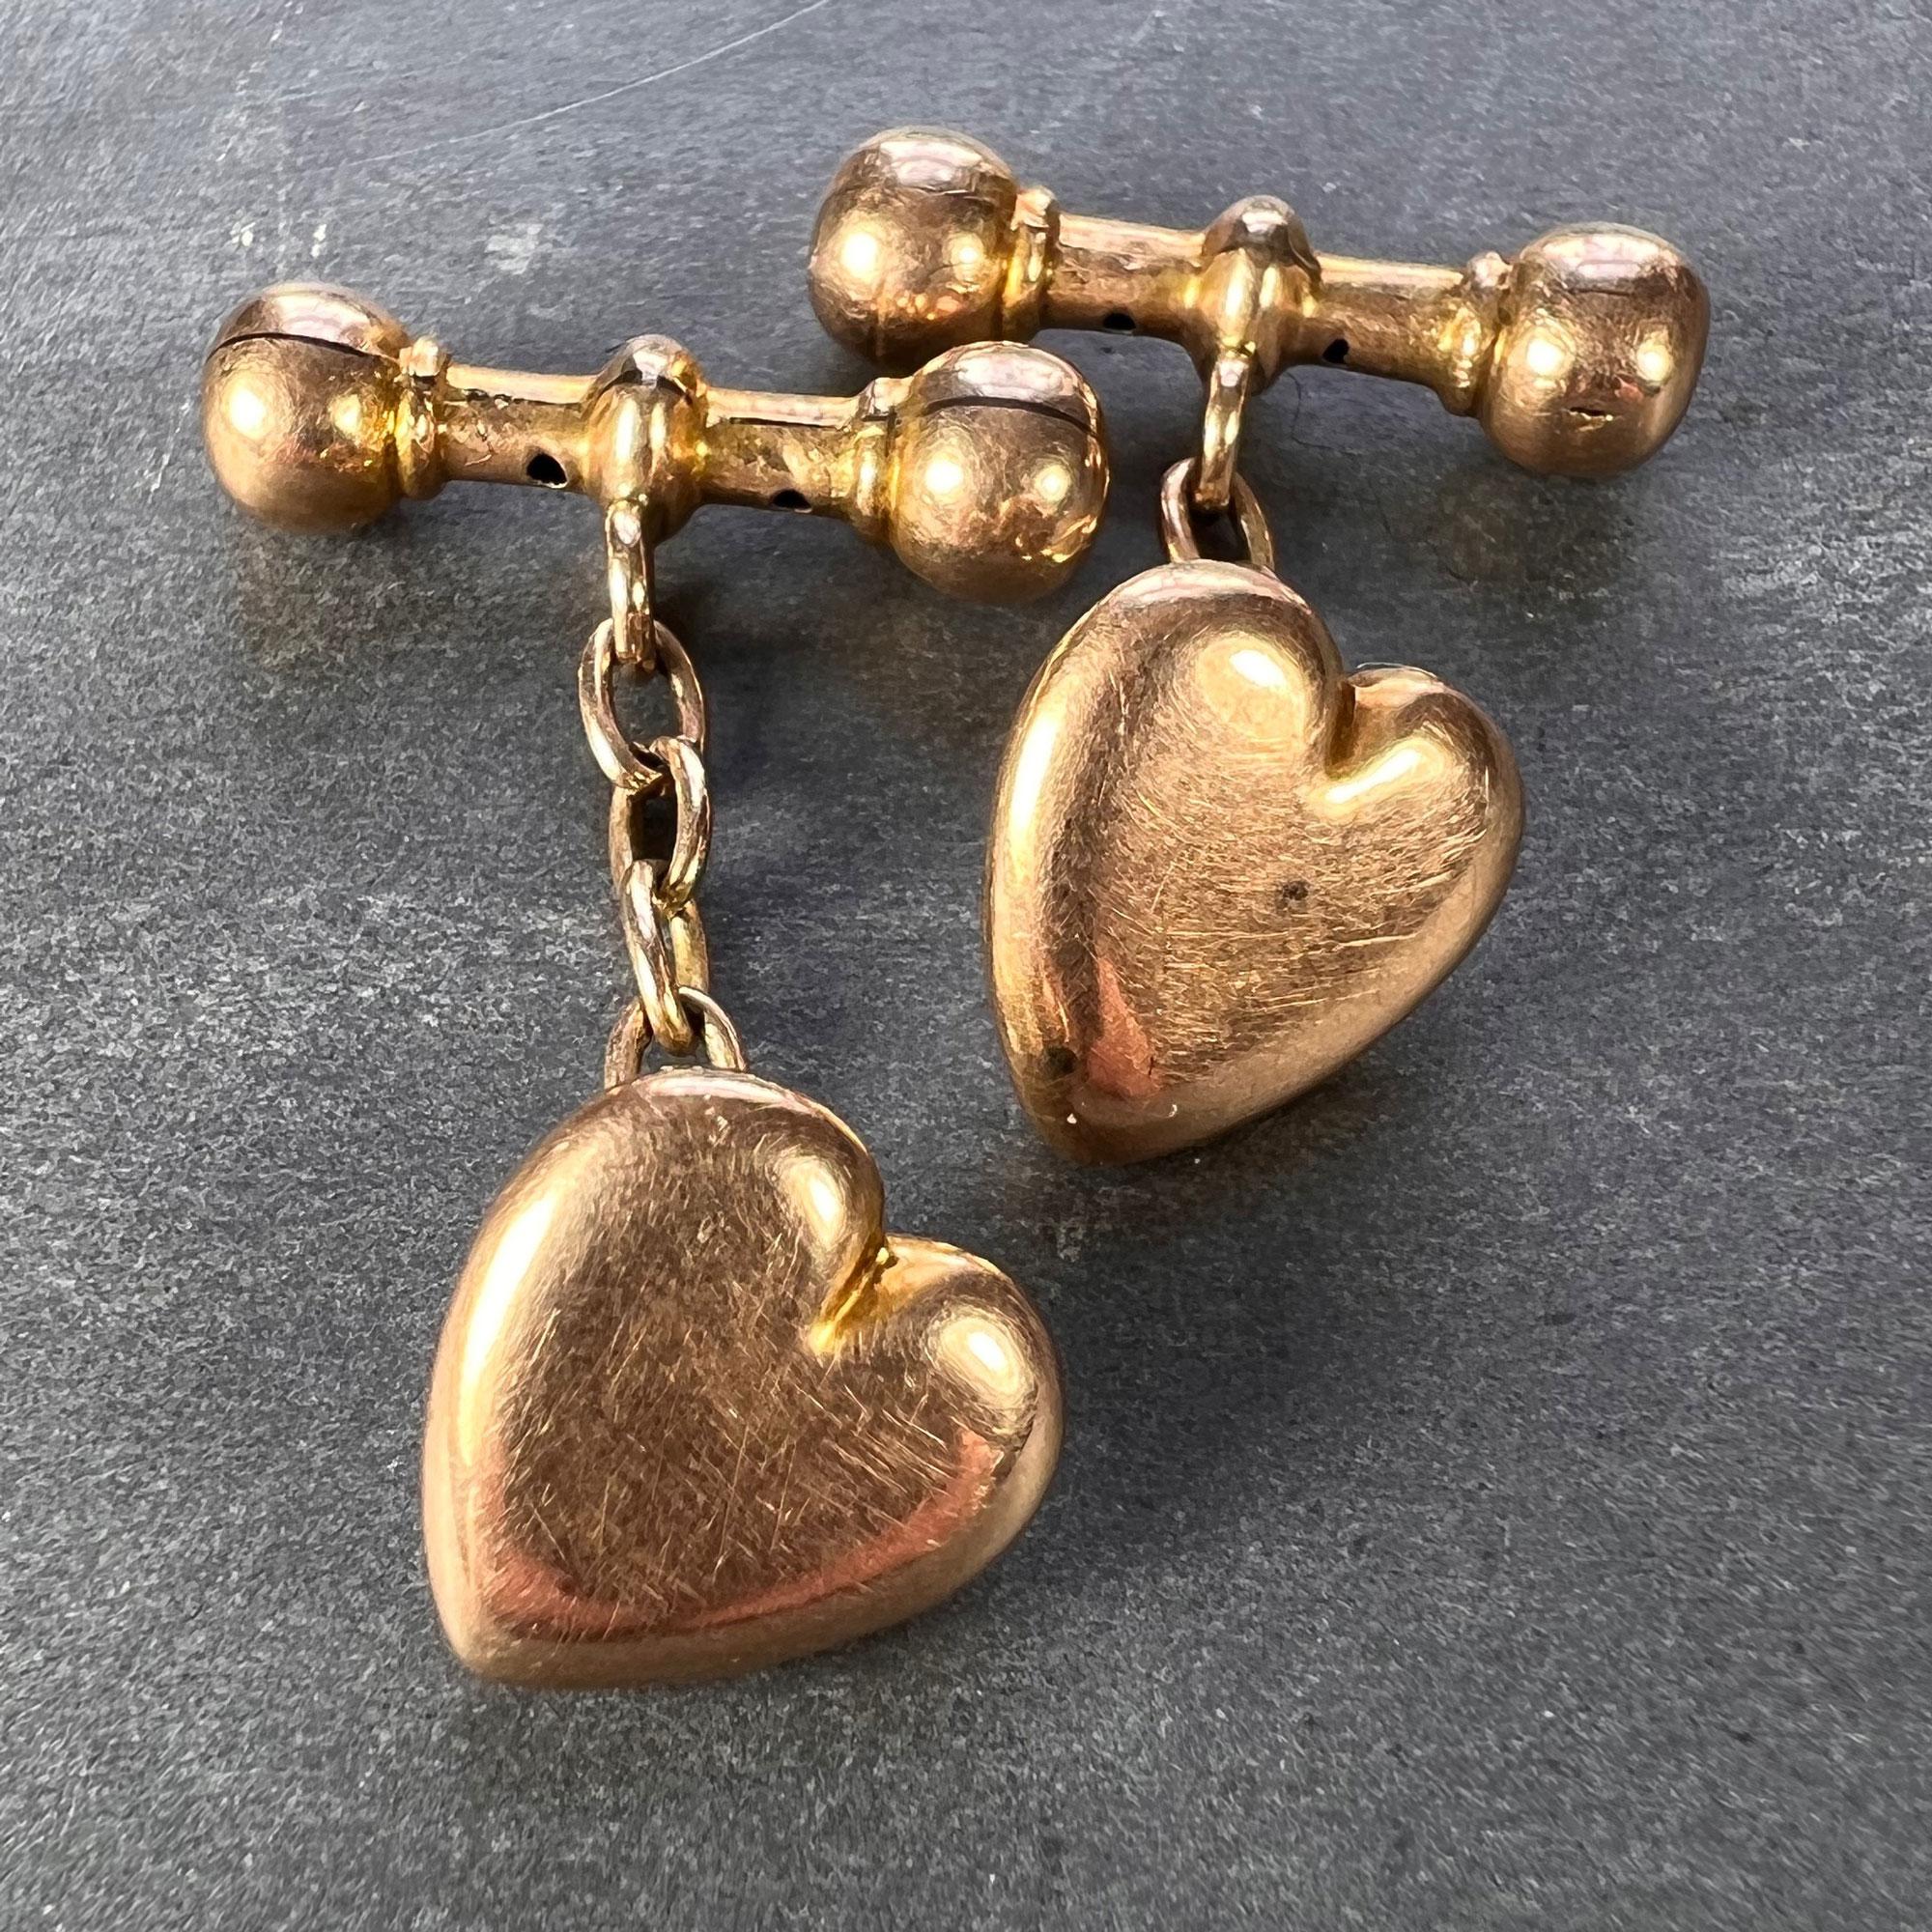 A pair of 9 karat (9K) rose gold cufflinks designed as a puffy heart to the front with a ridged bar to the reverse. Hallmarked for 9 karat gold, Birmingham, 1912 with makers mark for G.E. Walton & Co Ltd.

Dimensions: 1.3 x 1.1 x 0.4 cm